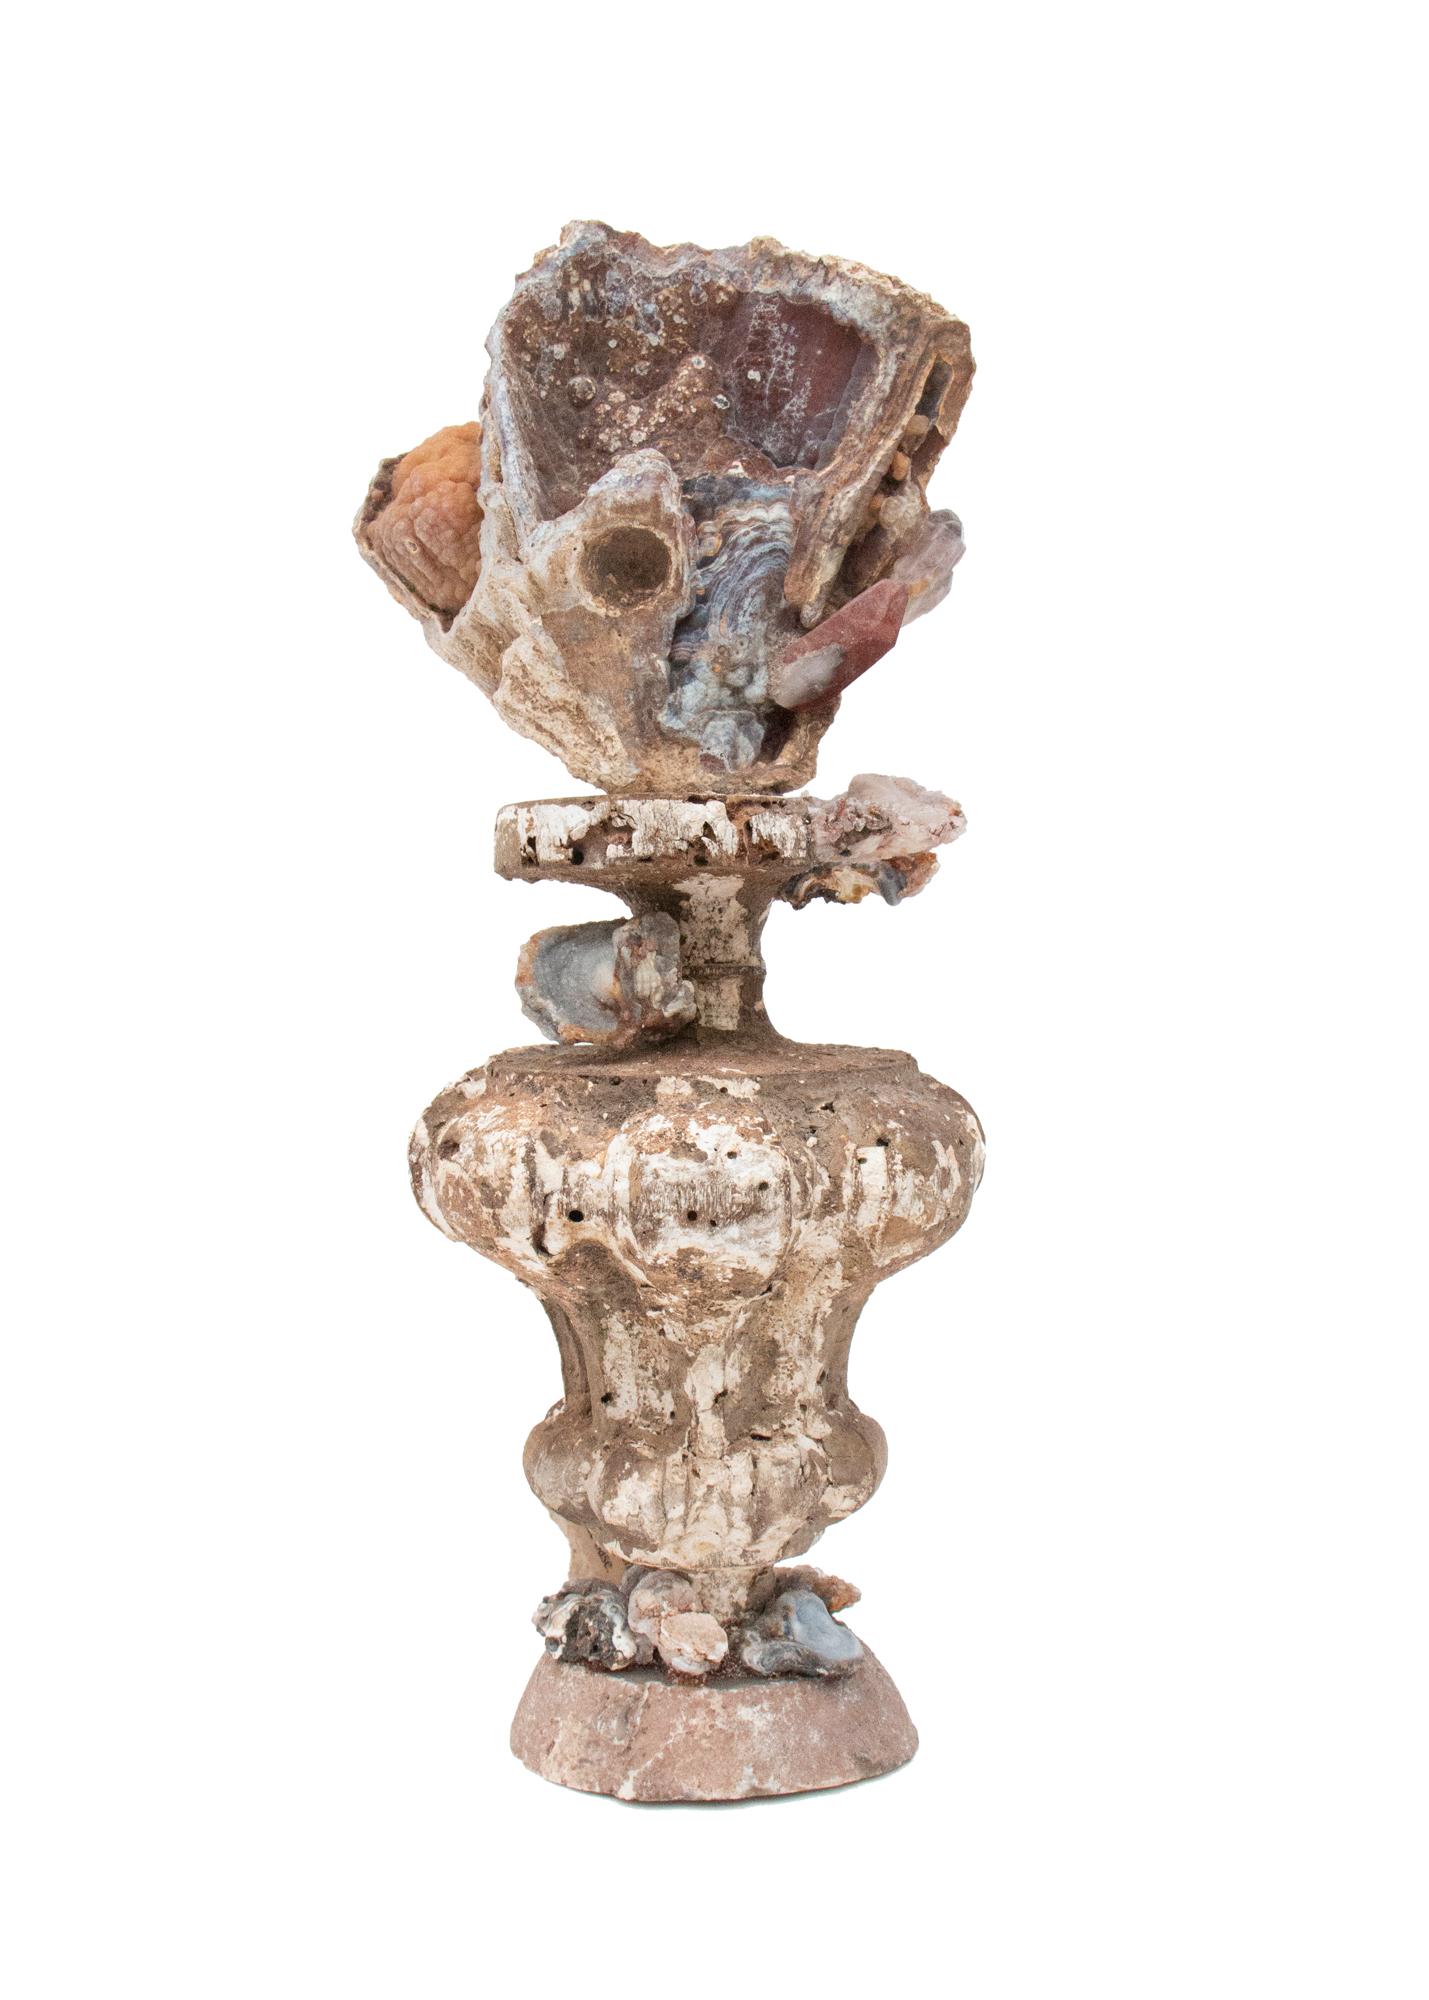 17th Century Italian church vase decorated with fossil agate coral, red phantom quartz crystals, and chalcedony rosettes on polished agate base.

This fragment is from a church in Florence. It was found and saved from the historic flooding of the